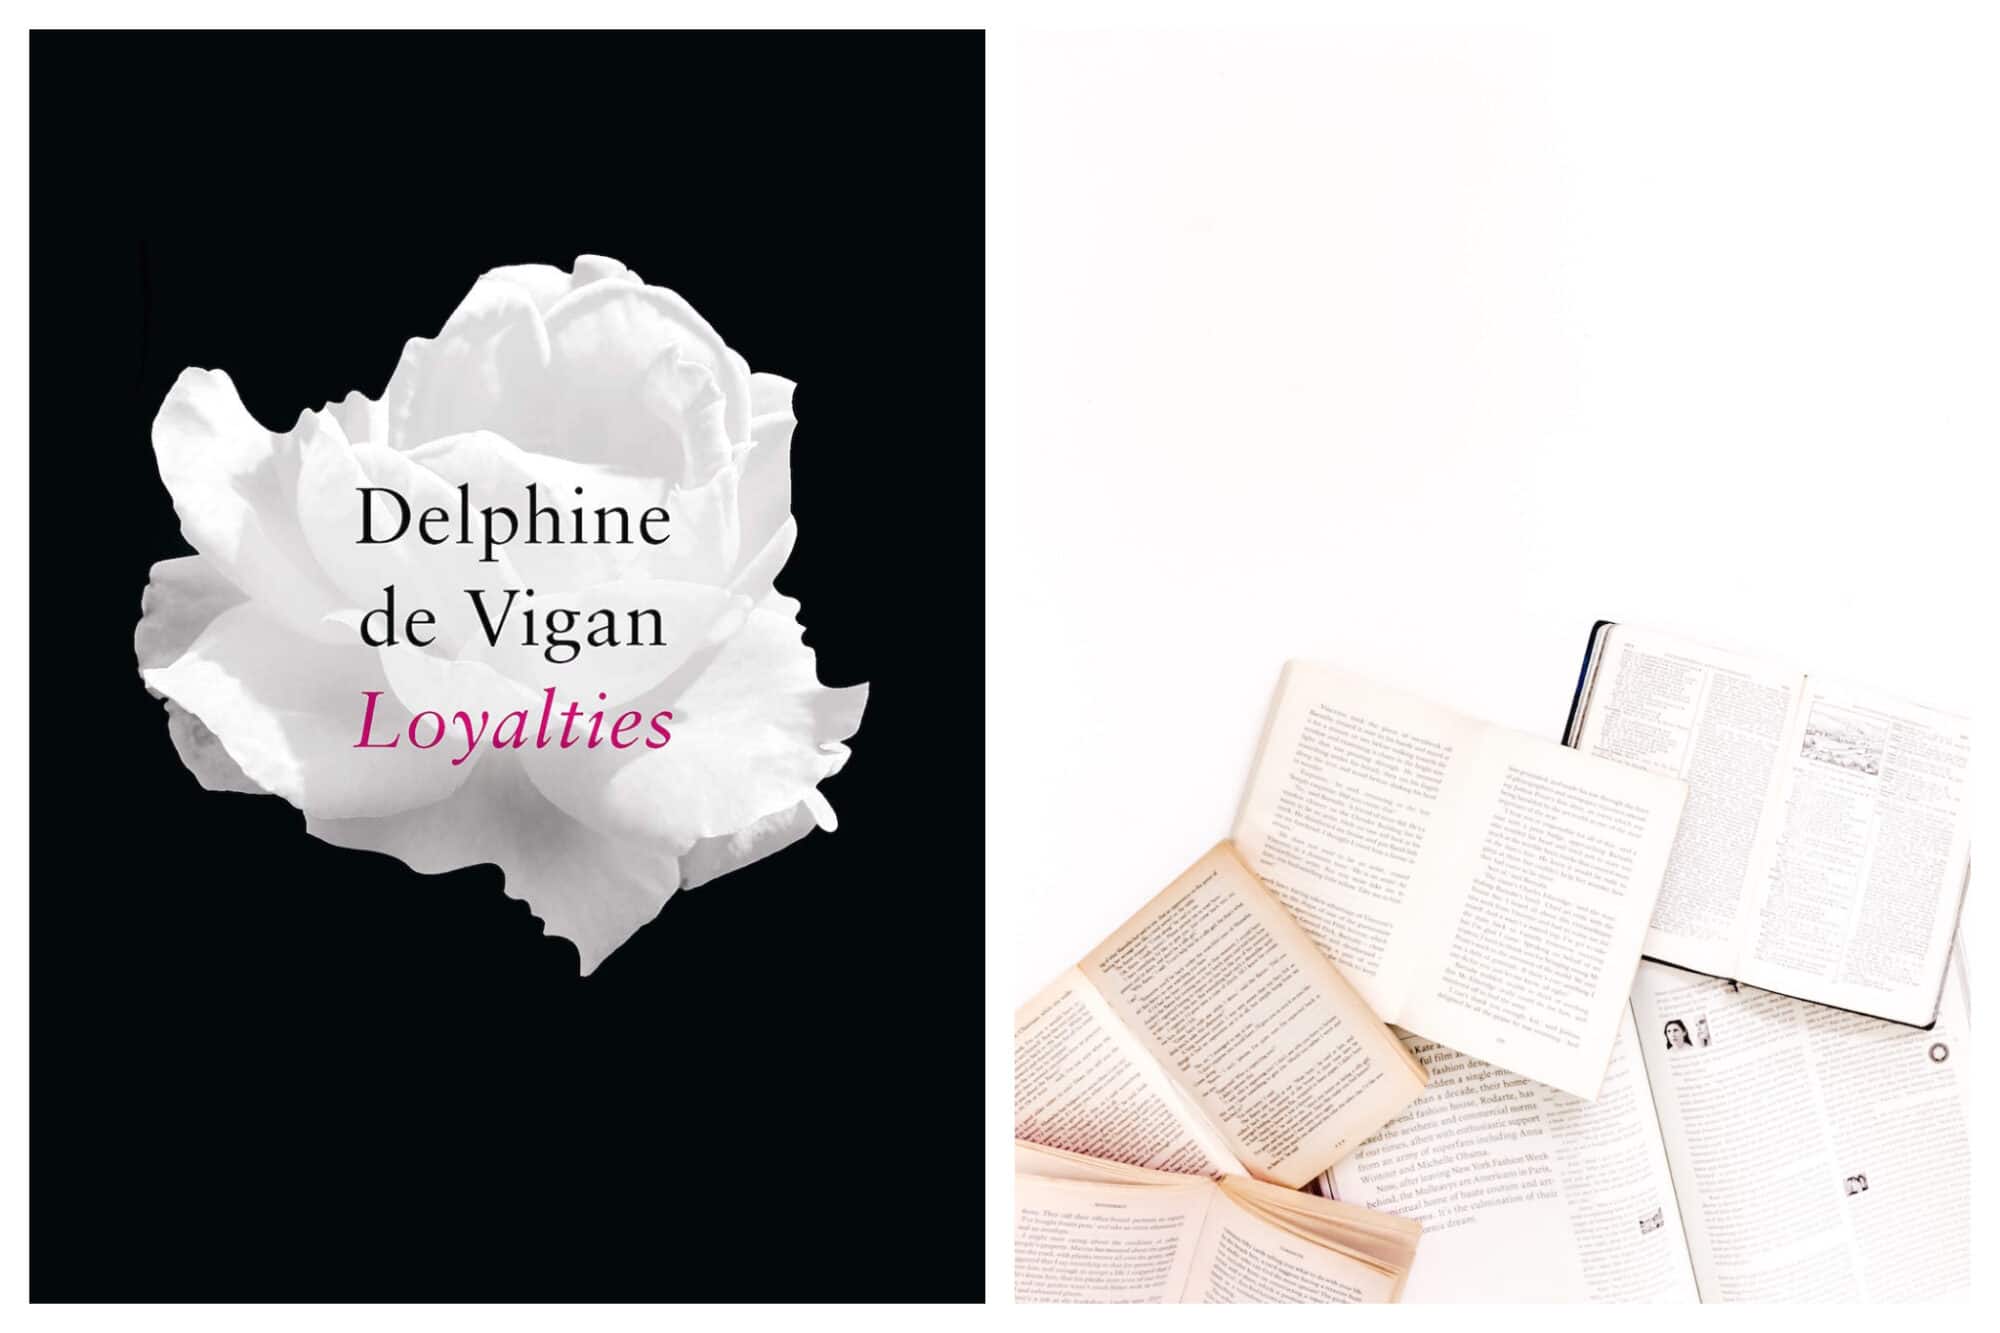 Left: The cover for Delphine de Vigan's new book loyalties, which is black with a white flower in the center, Right" Books are laid open atop a white surface